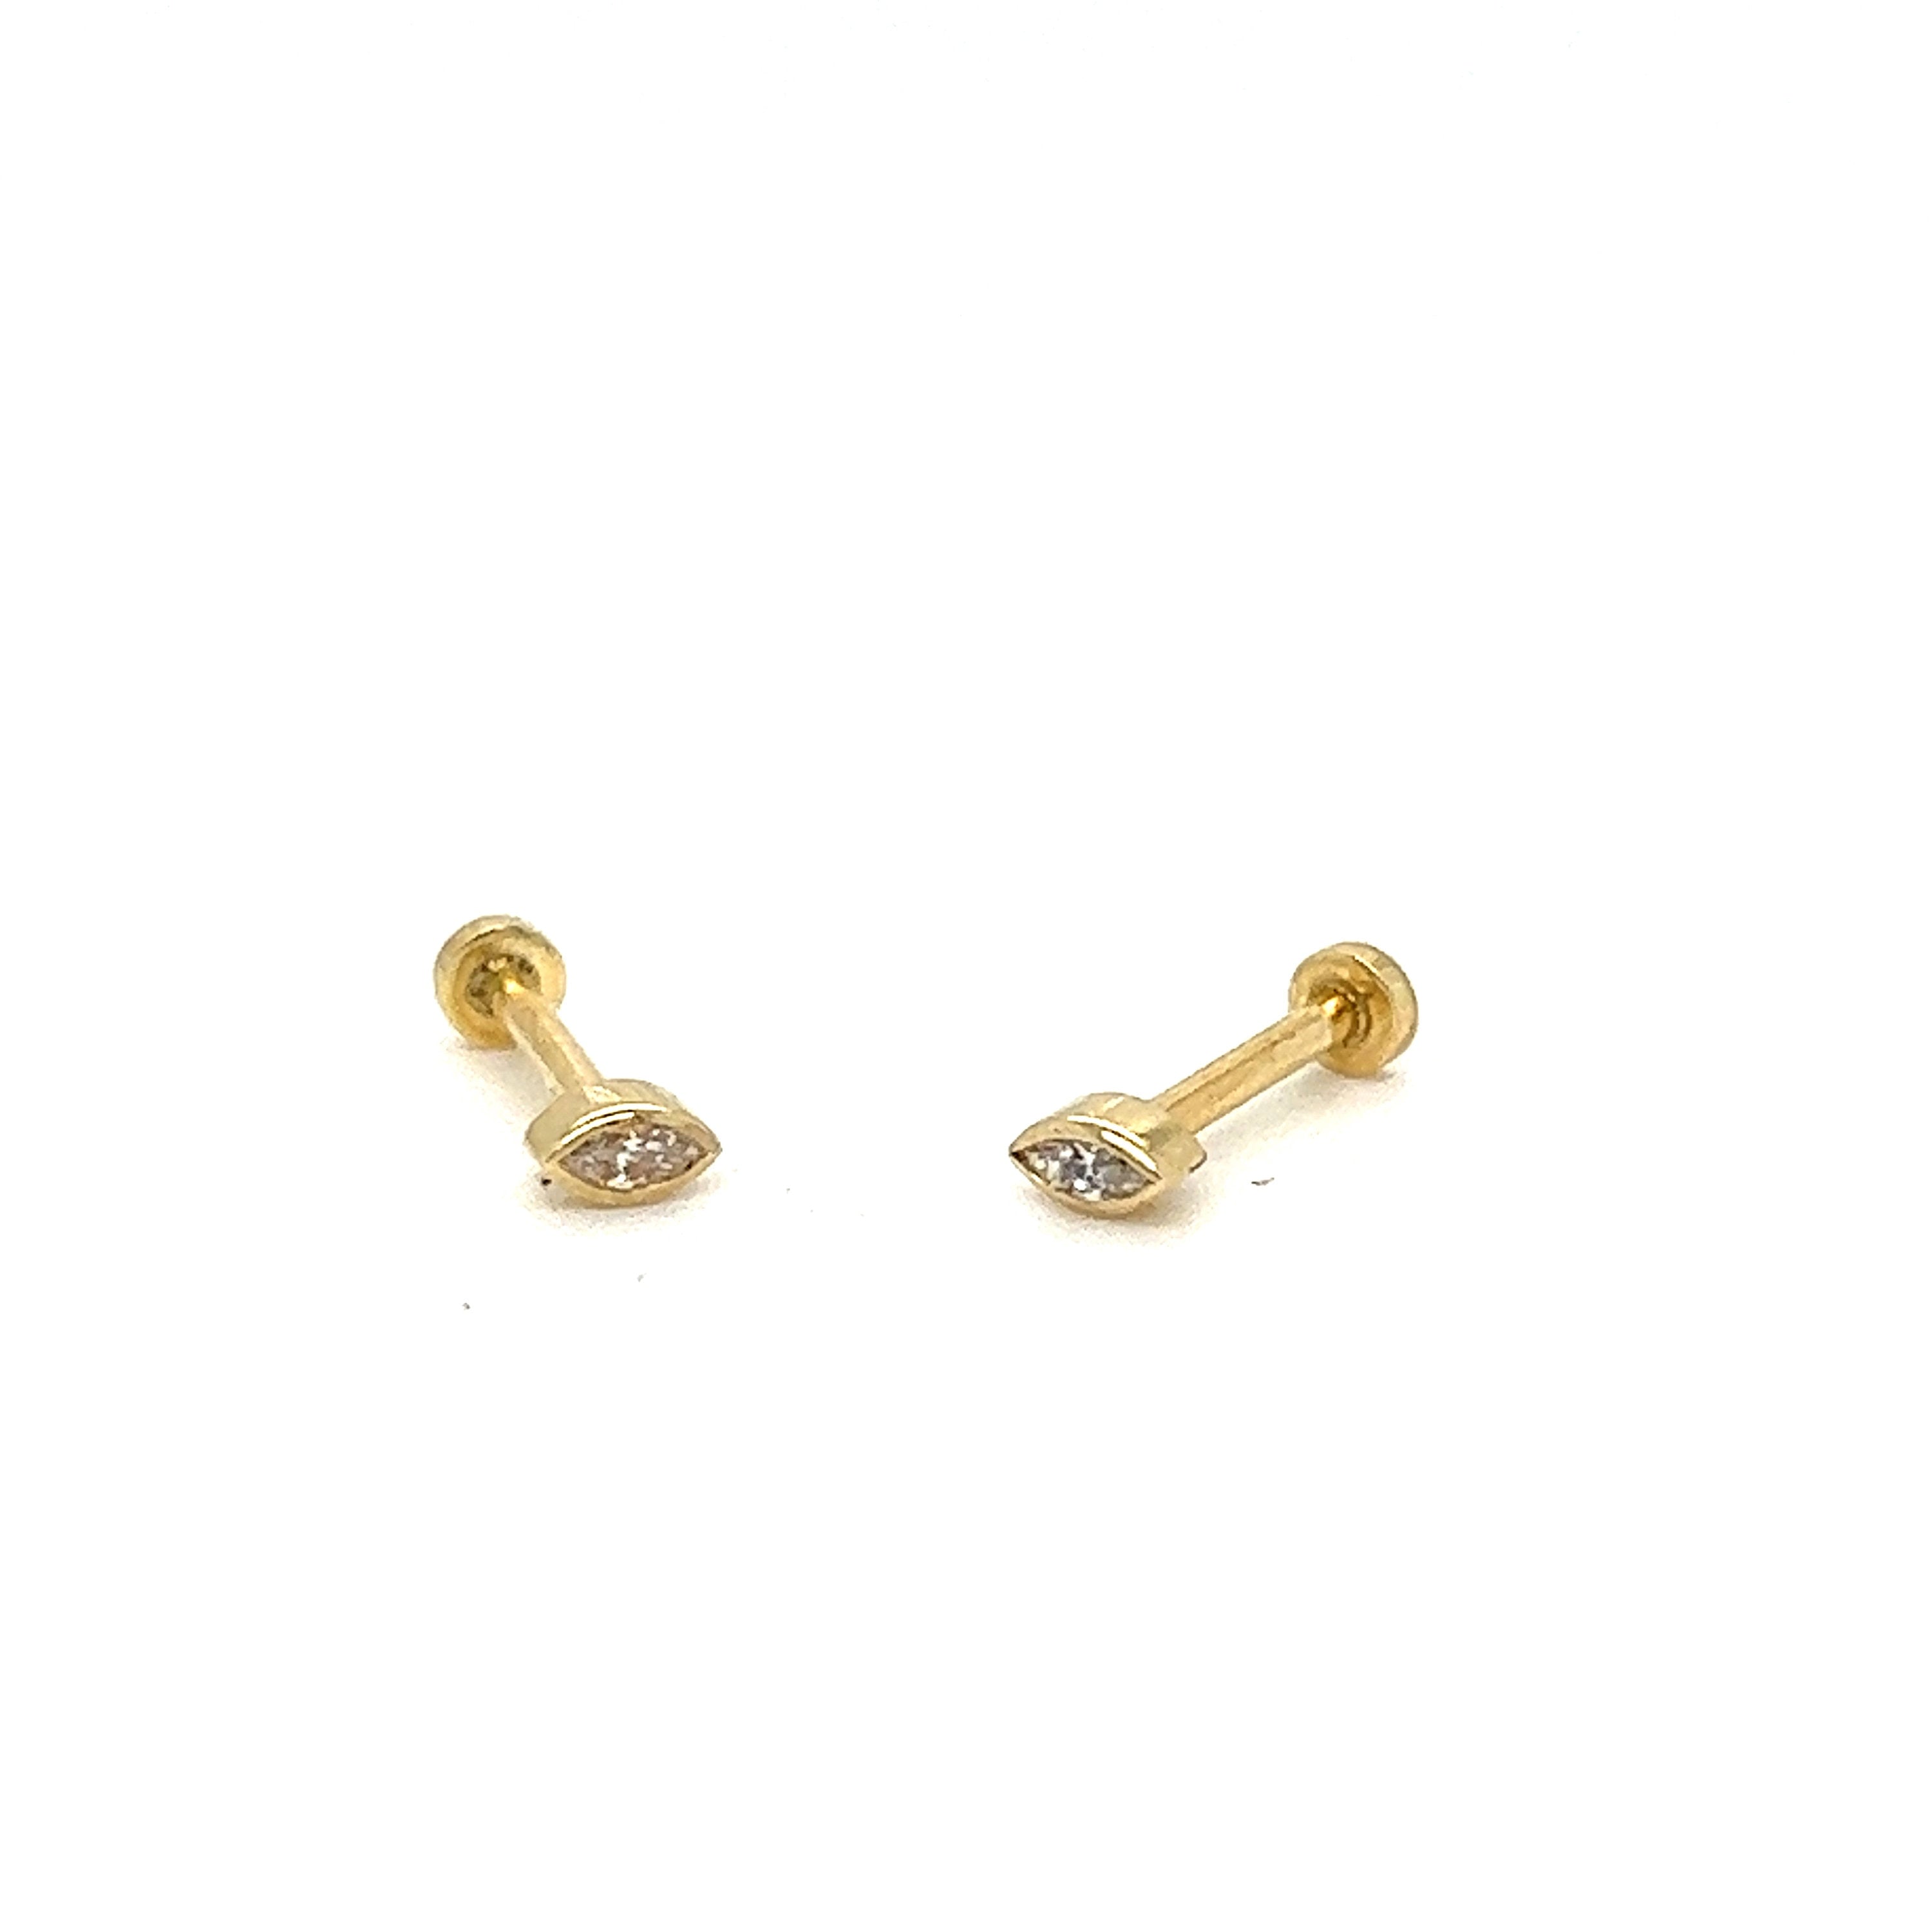 Marquise Cut Diamond Stud Earrings in Solid 14K Yellow Gold, Bezel Set, Small, Natural Diamond.